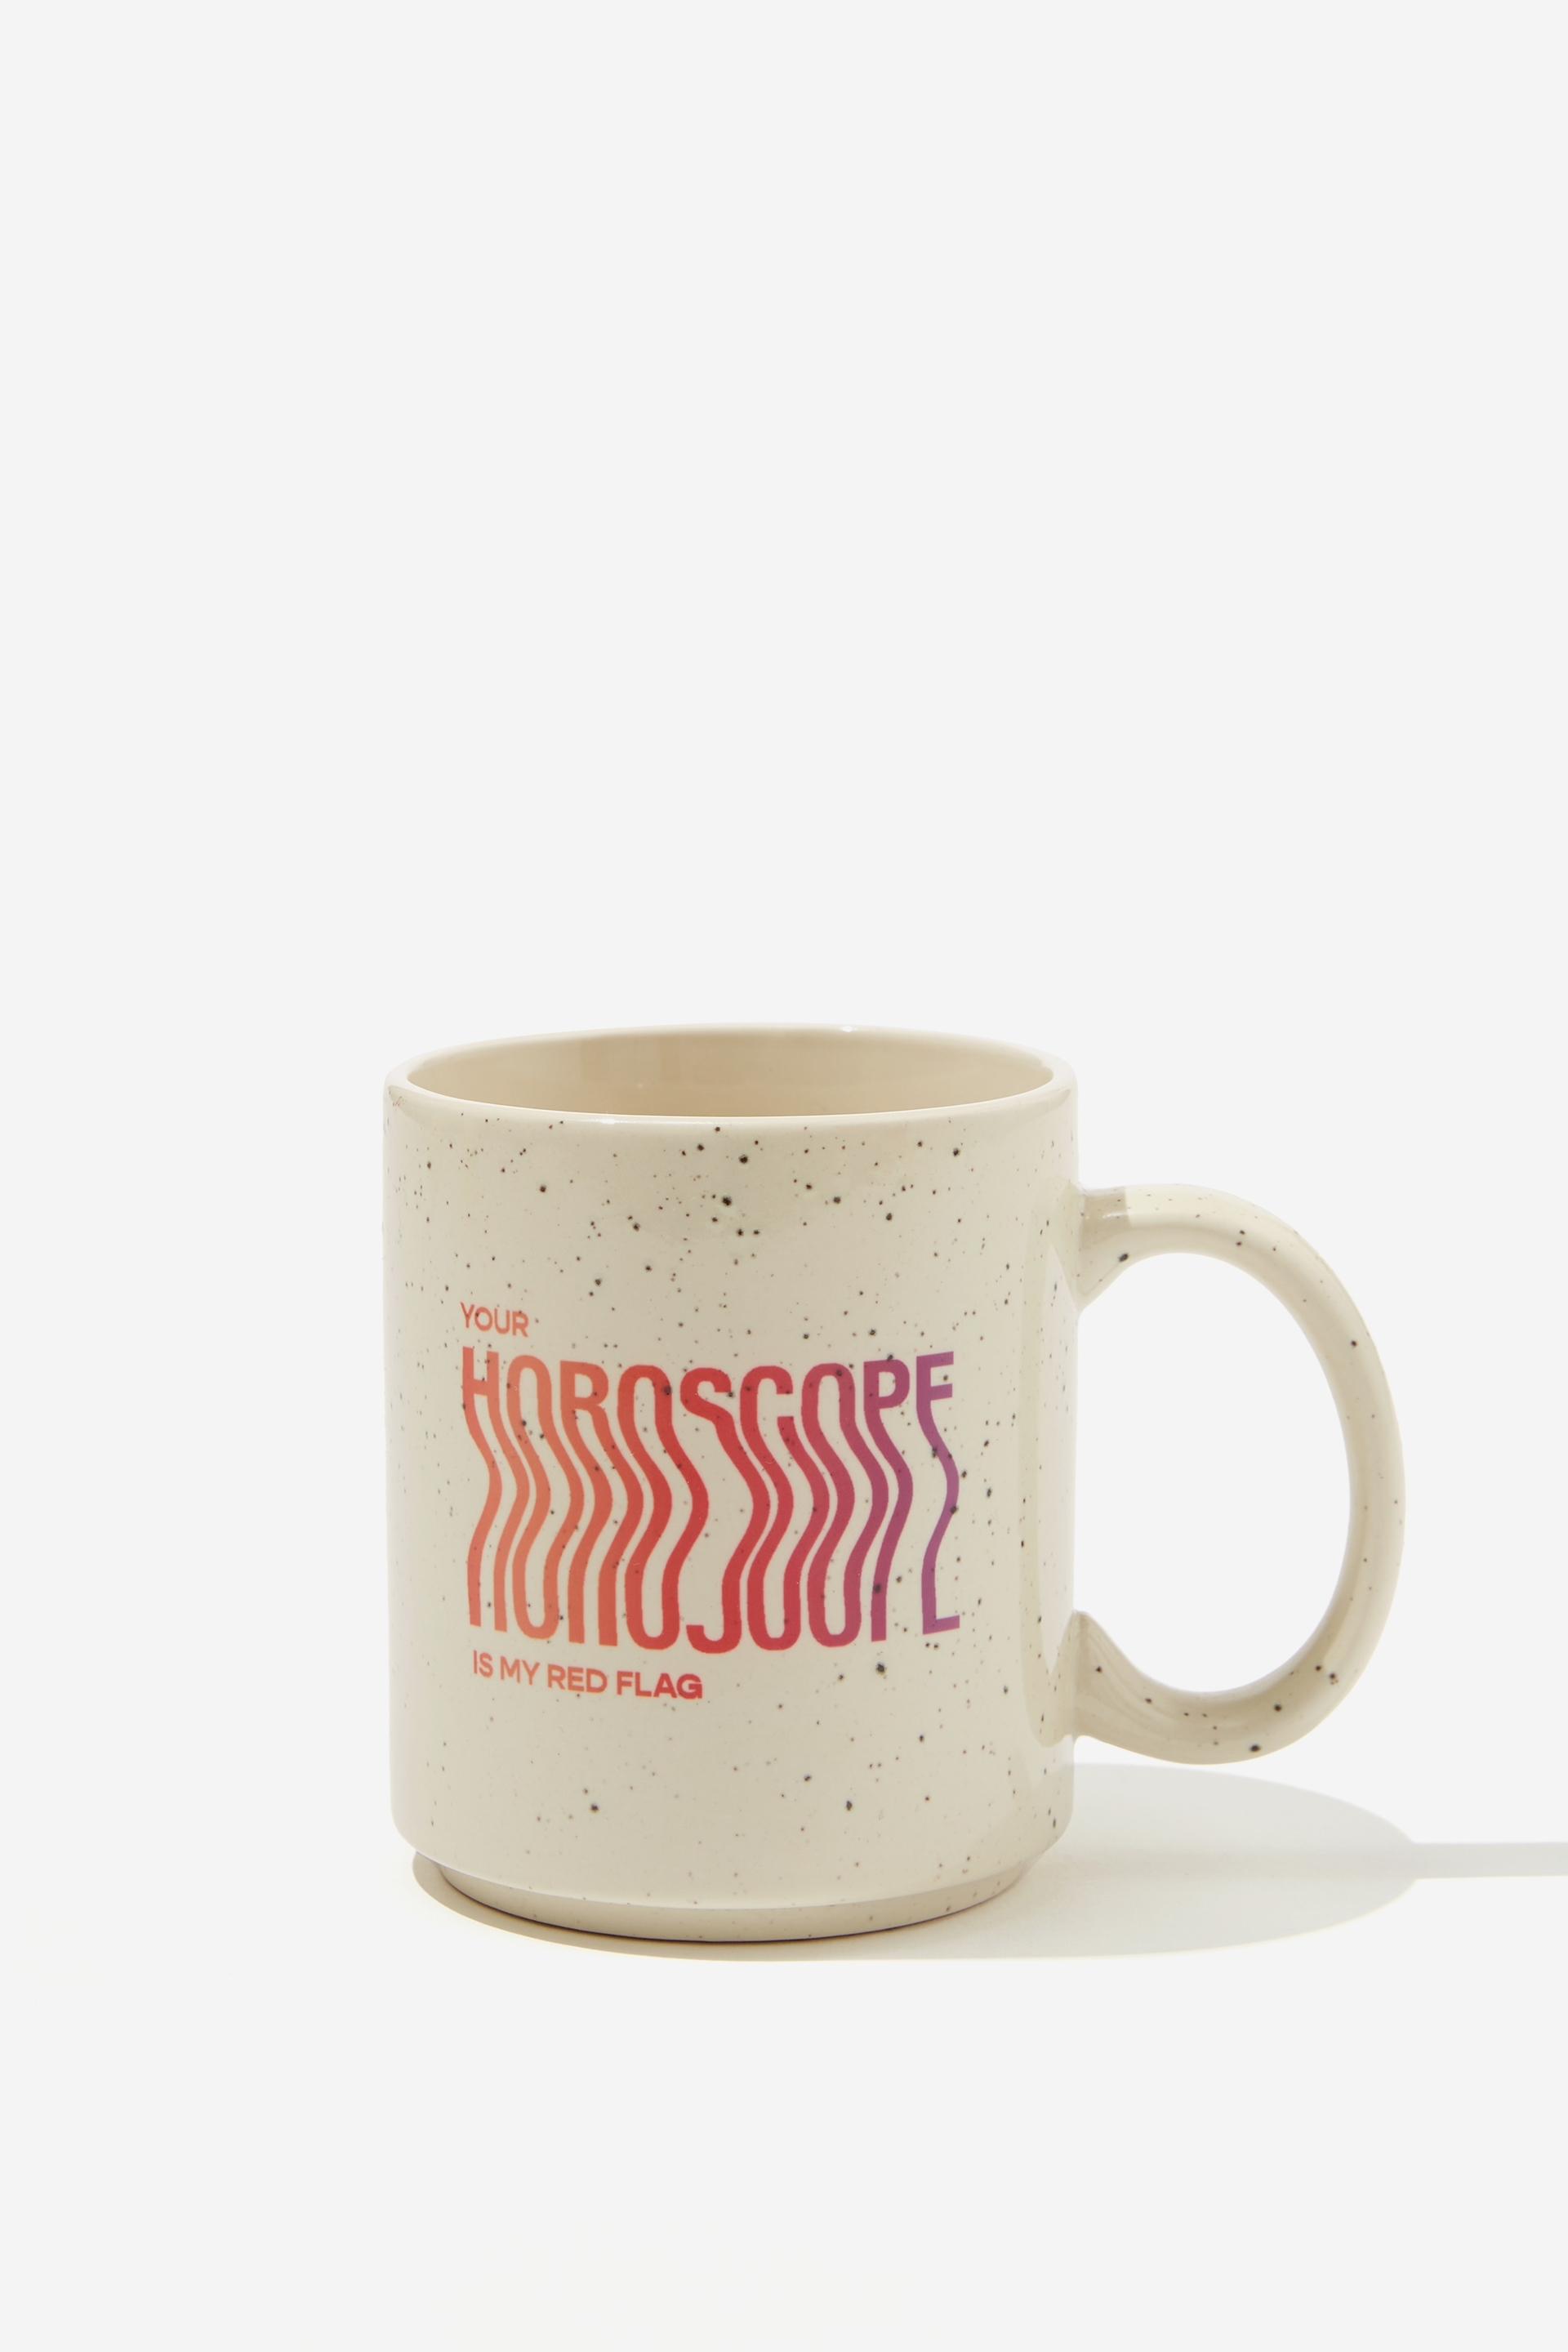 Typo - Limited Edition Horoscope Mug - Horoscope is my red flag speckle